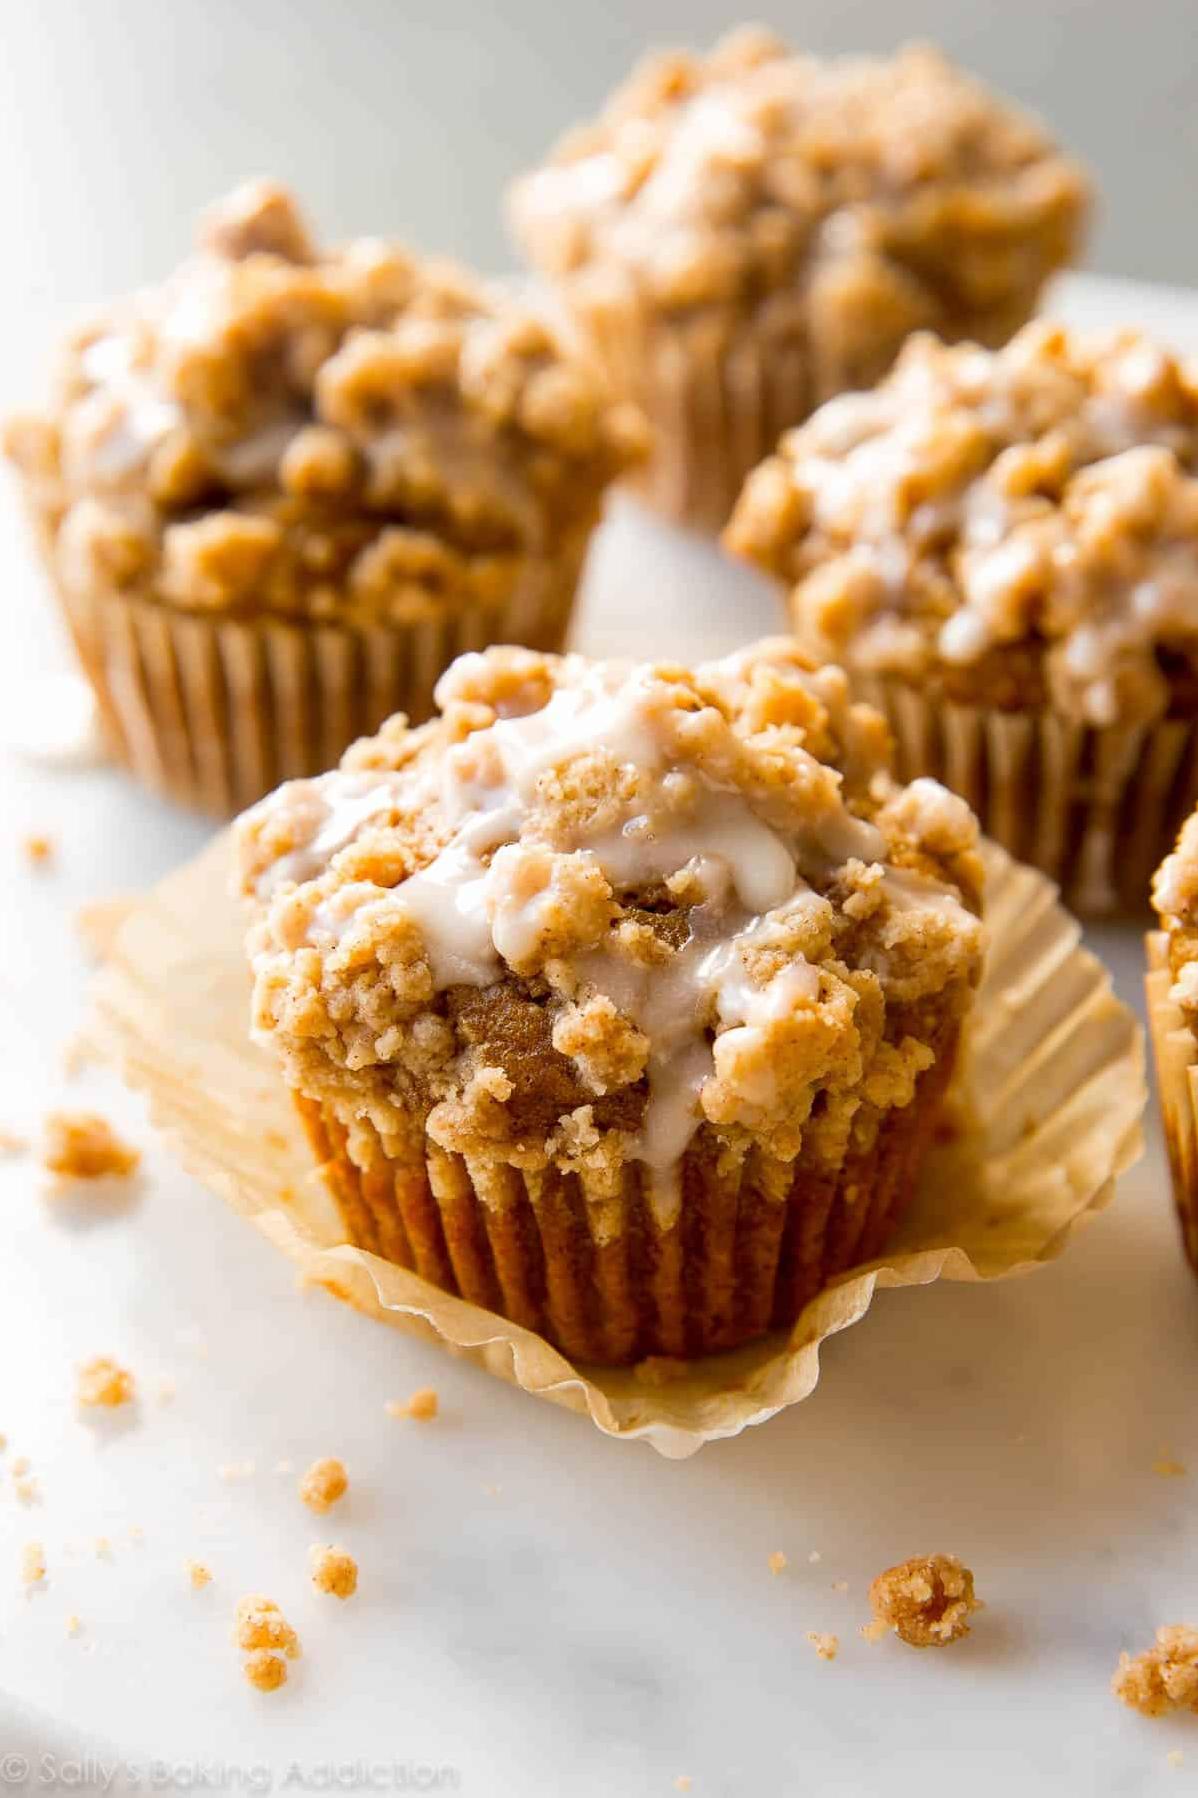  Imagine the delicious aroma of these muffins filling your kitchen, making it feel like the coziest spot in the house.